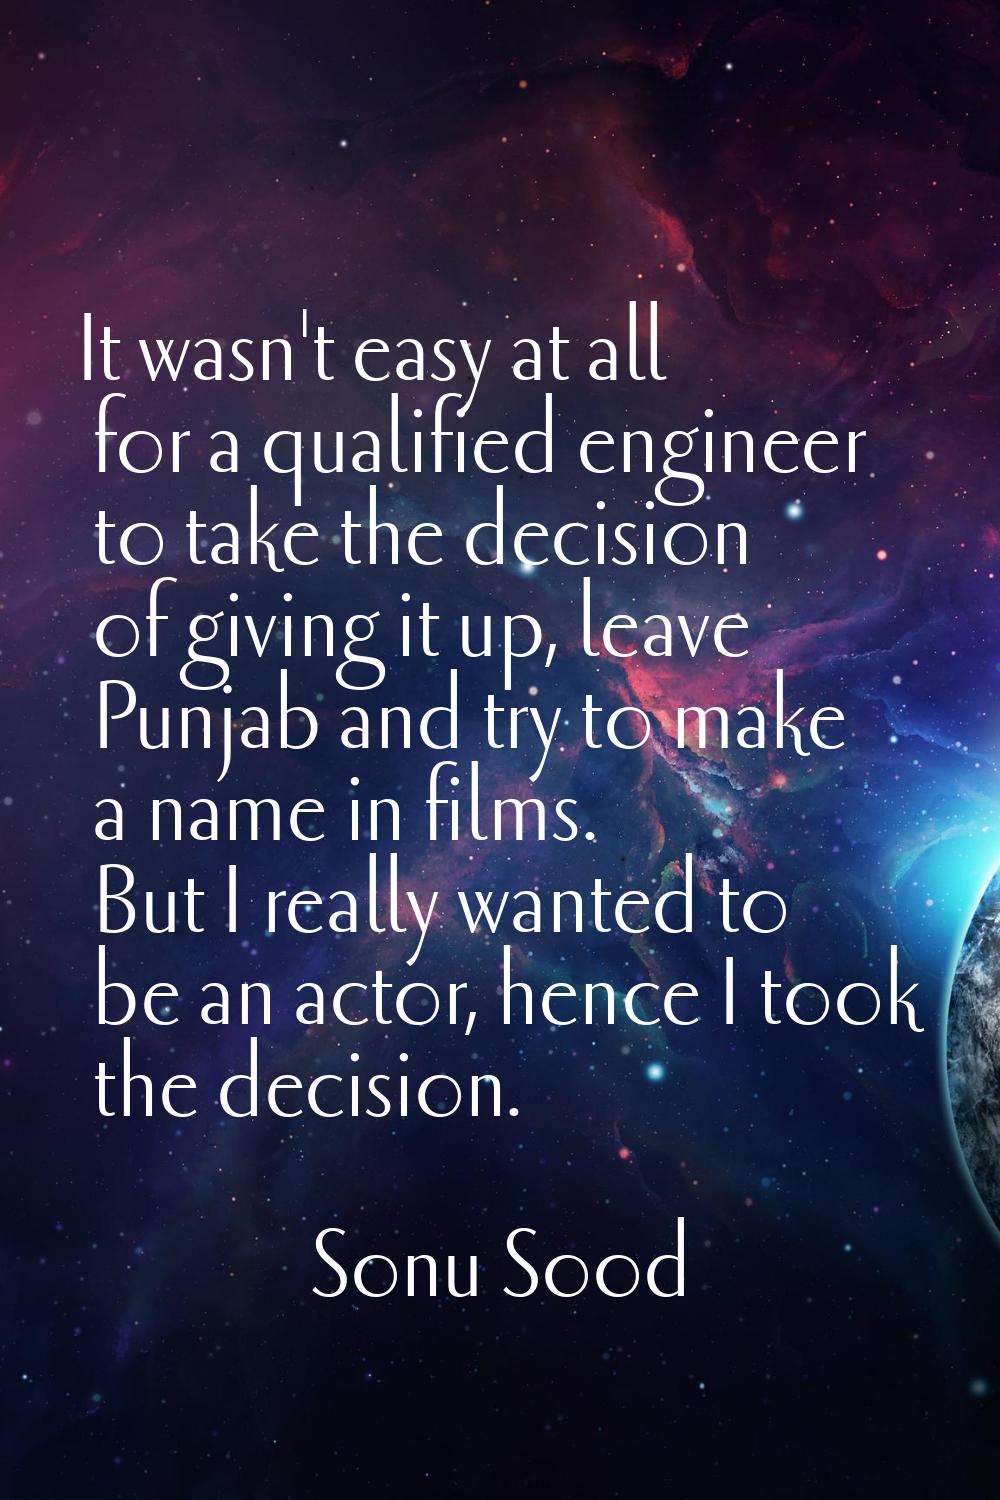 It wasn't easy at all for a qualified engineer to take the decision of giving it up, leave Punjab a